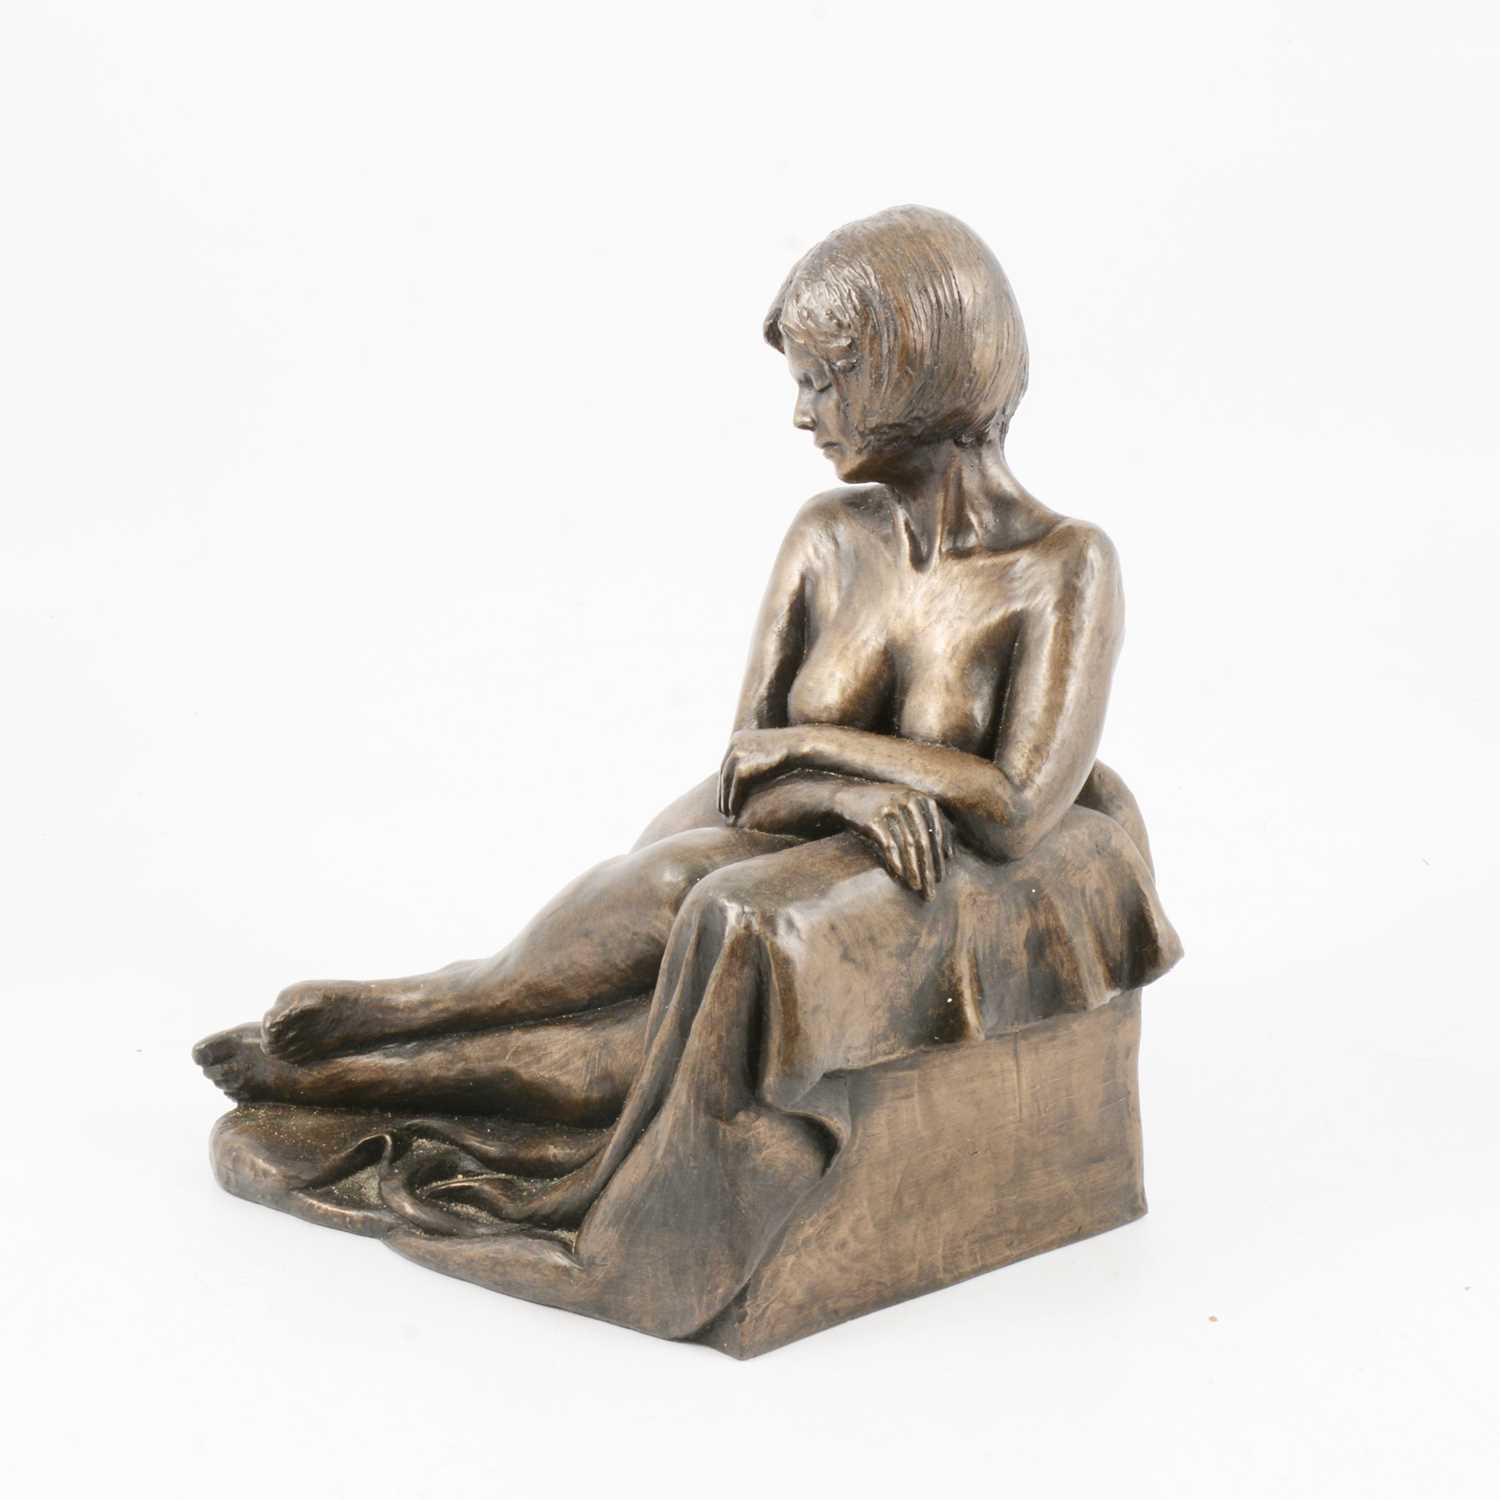 Lot 1096 - Moira Purver, Between Poses, limited edition sculpture